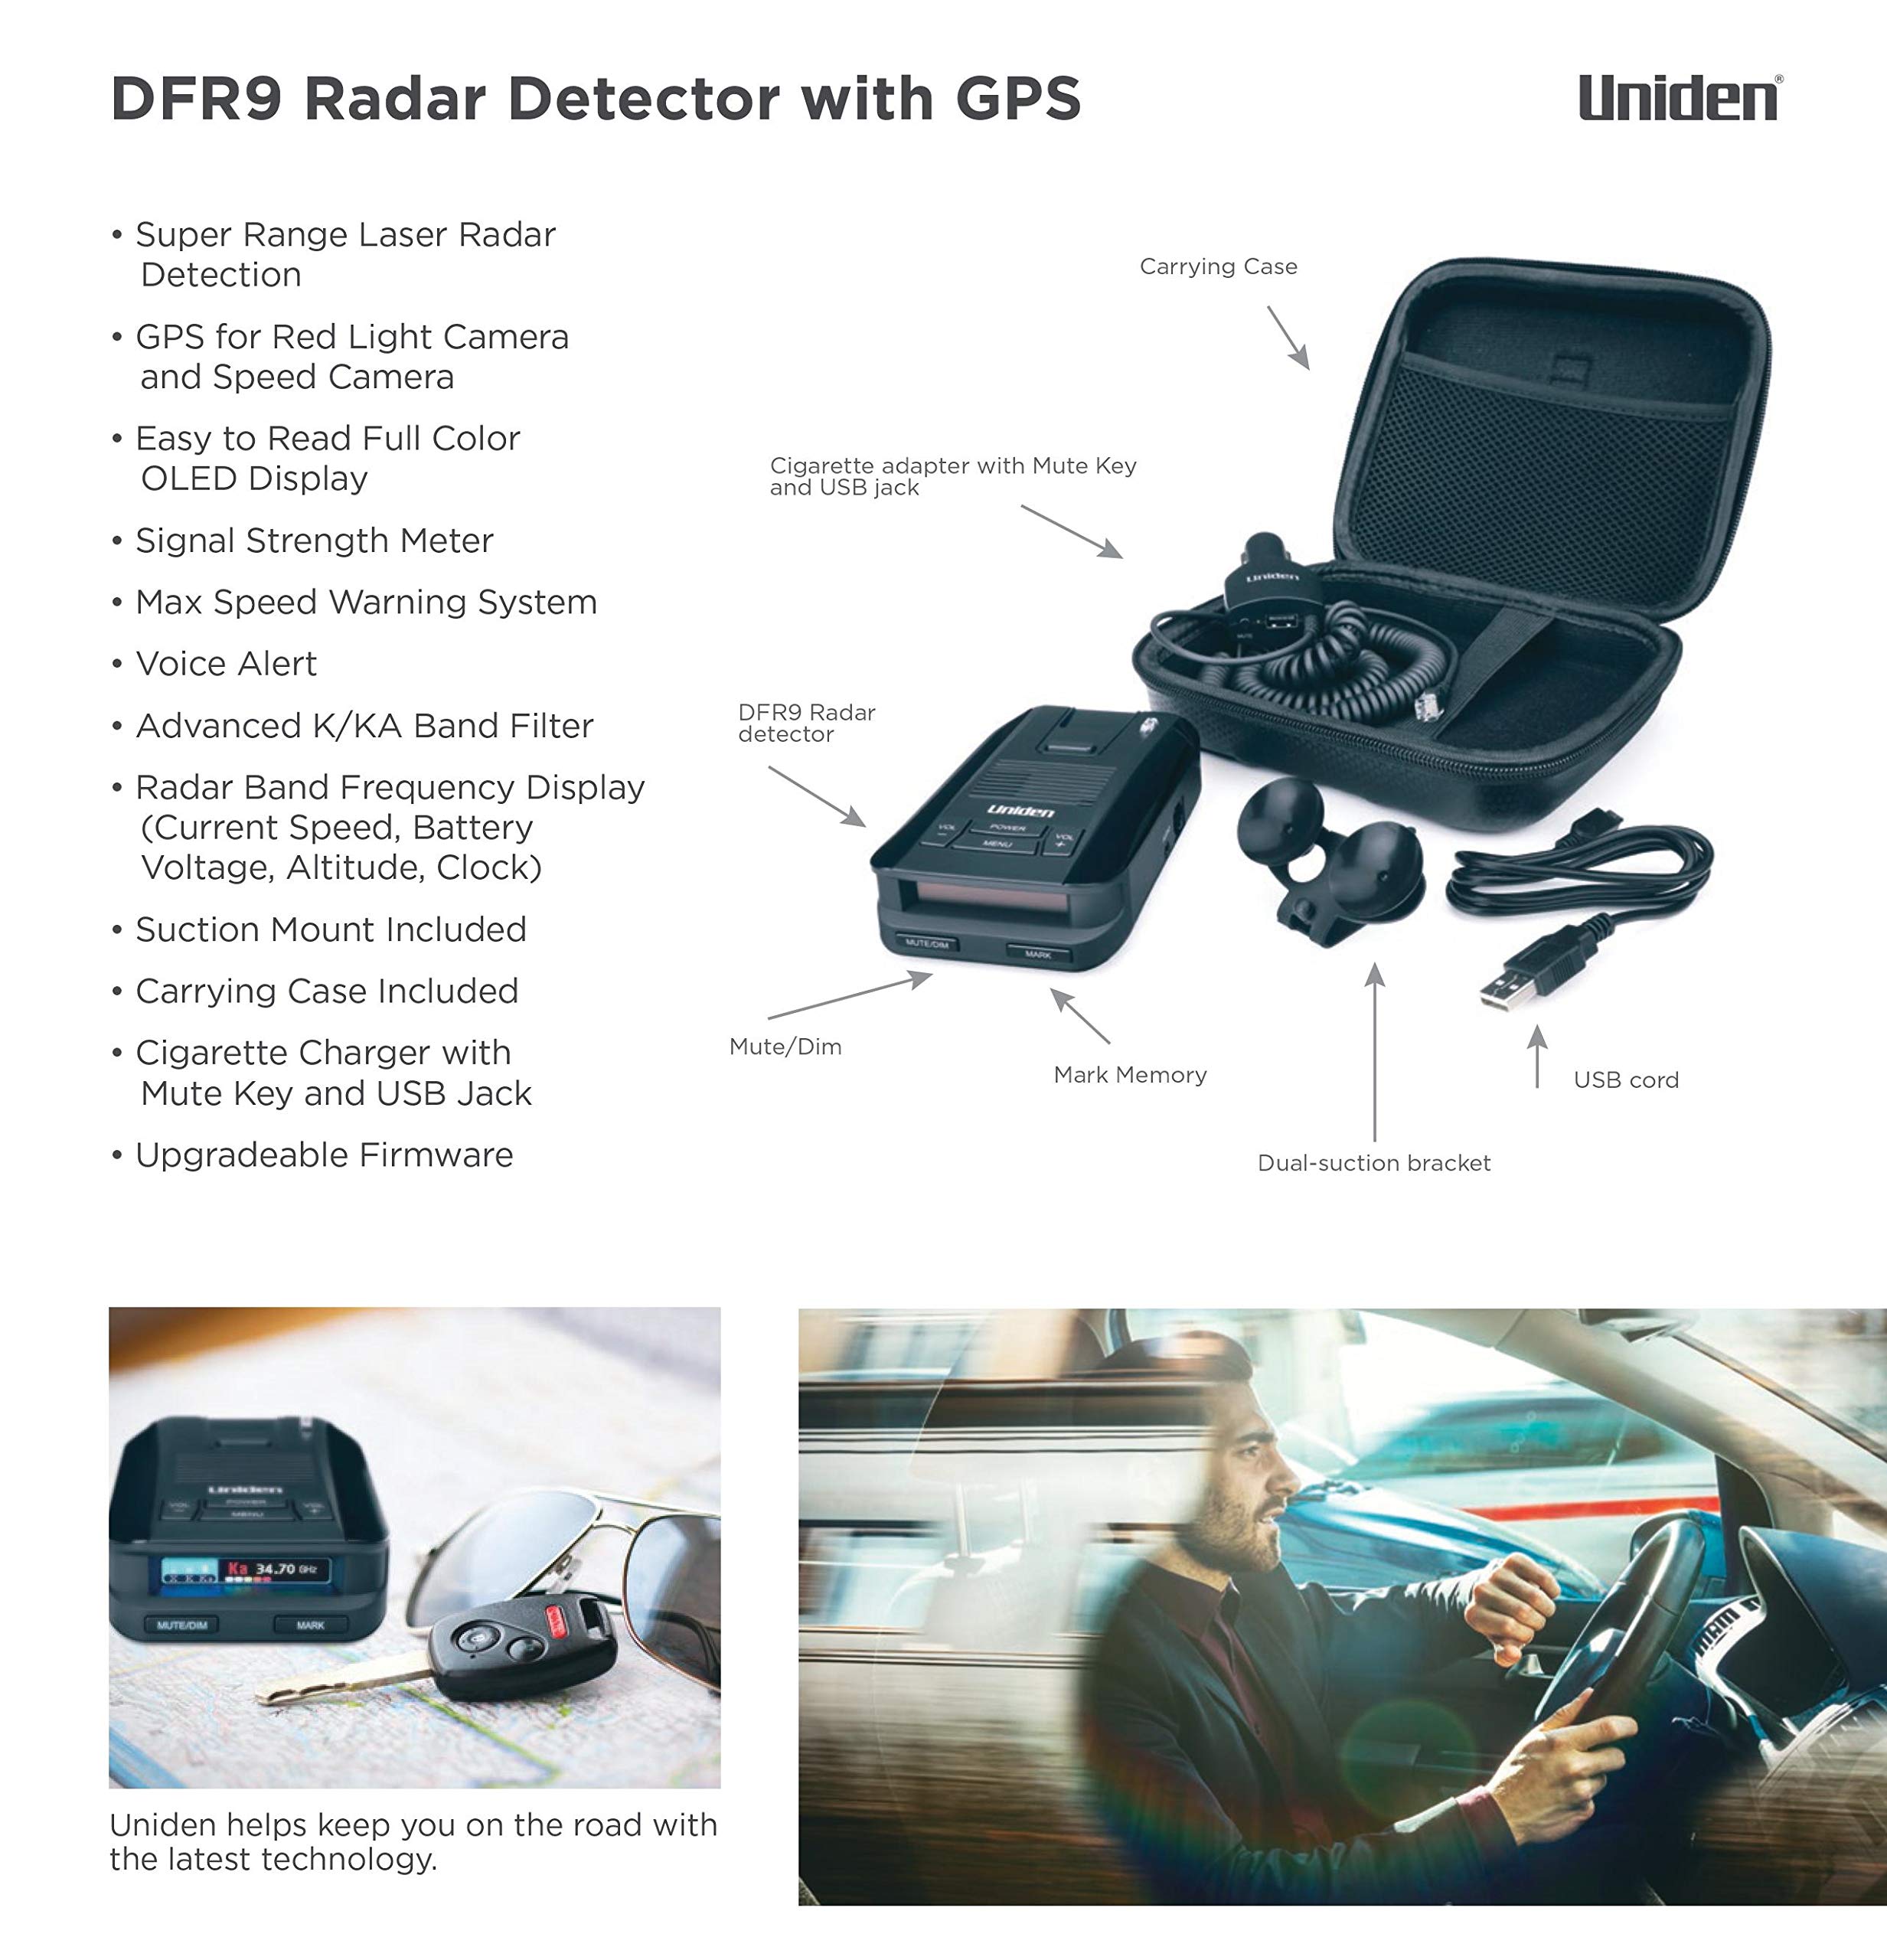 Uniden DFR9 Super Long Range Laser and Radar Detection, Built-In GPS for Red Light Cameras and Speed Camera Alerts, Easy to Read Full Color OLED Display